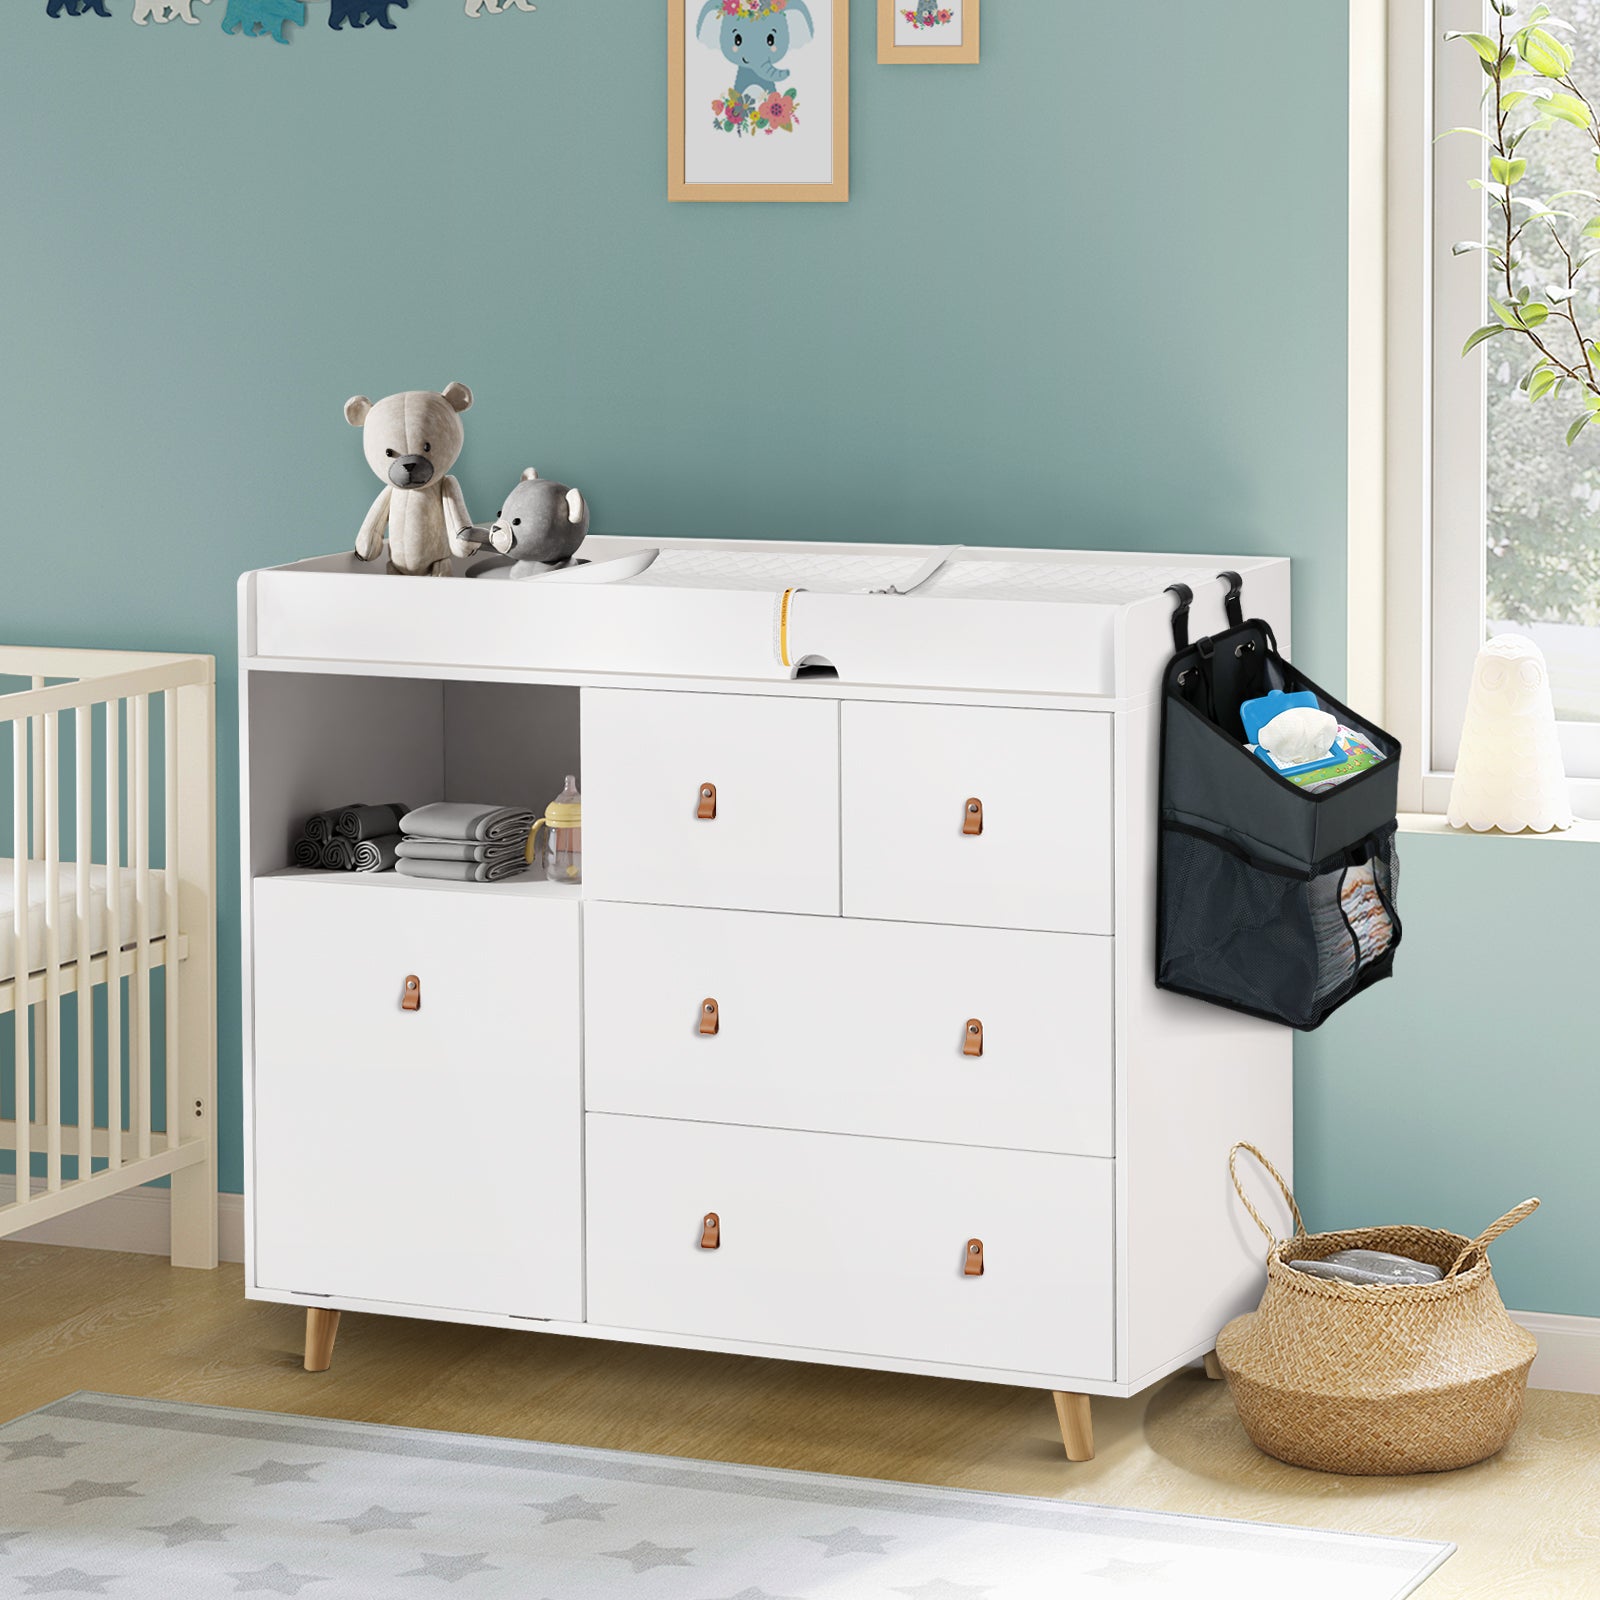 Baby Change Table Dresser Nursery Table Dresser 5 Drawers with Open Storage